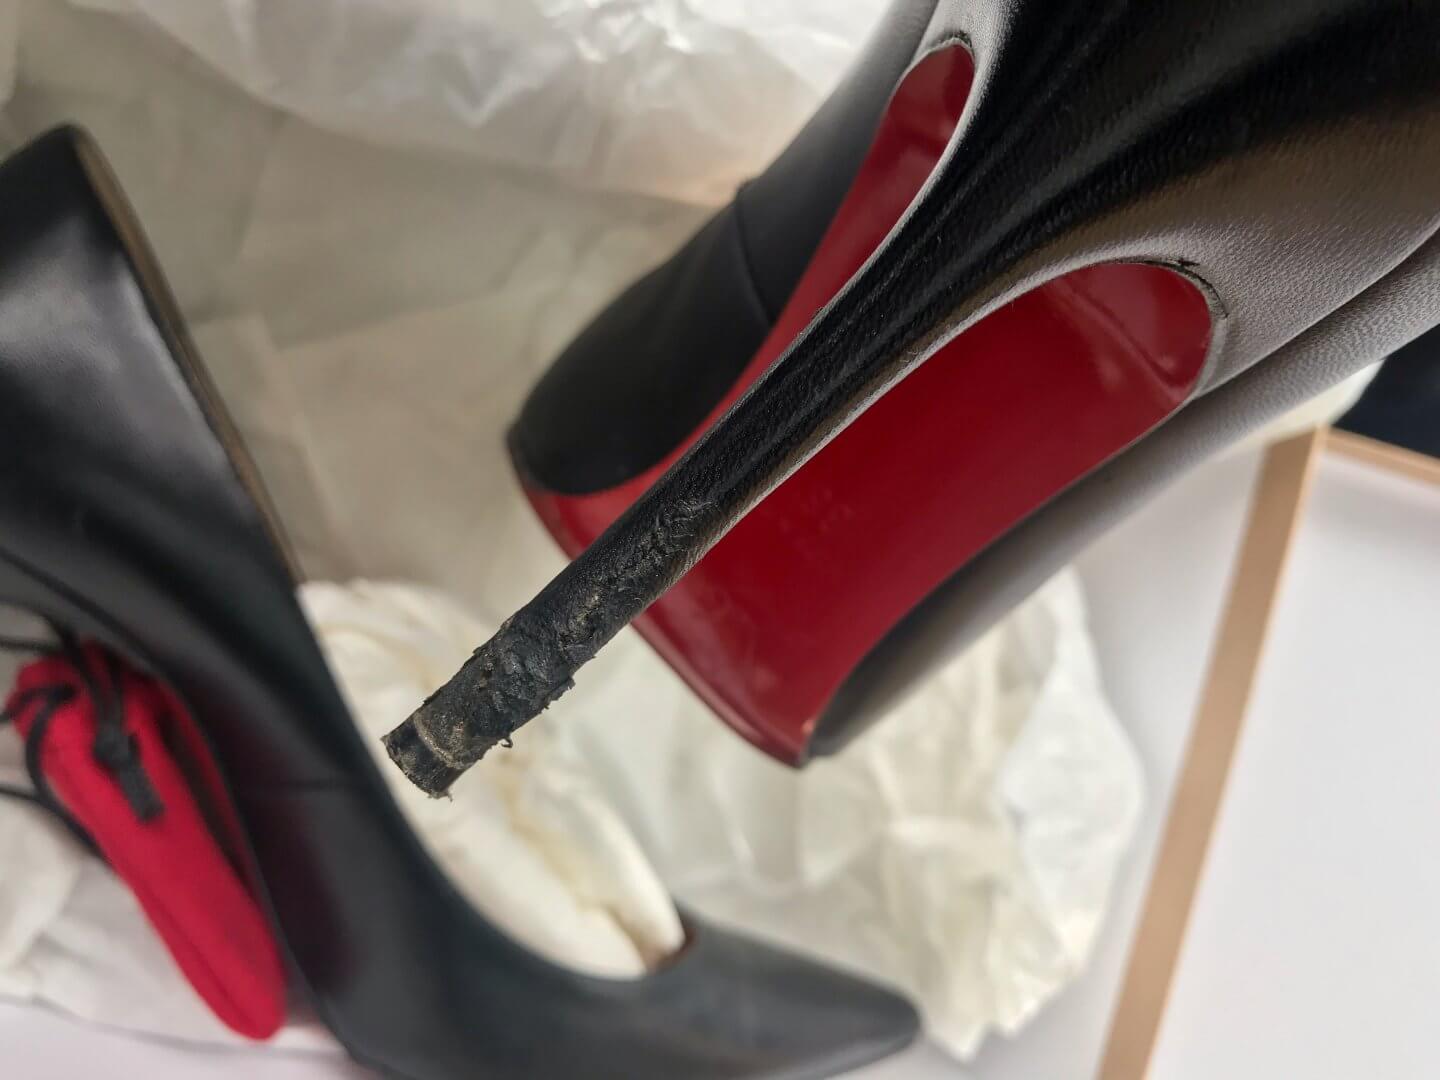 Tips on How to Take Care of your Christian Louboutin Shoes ...